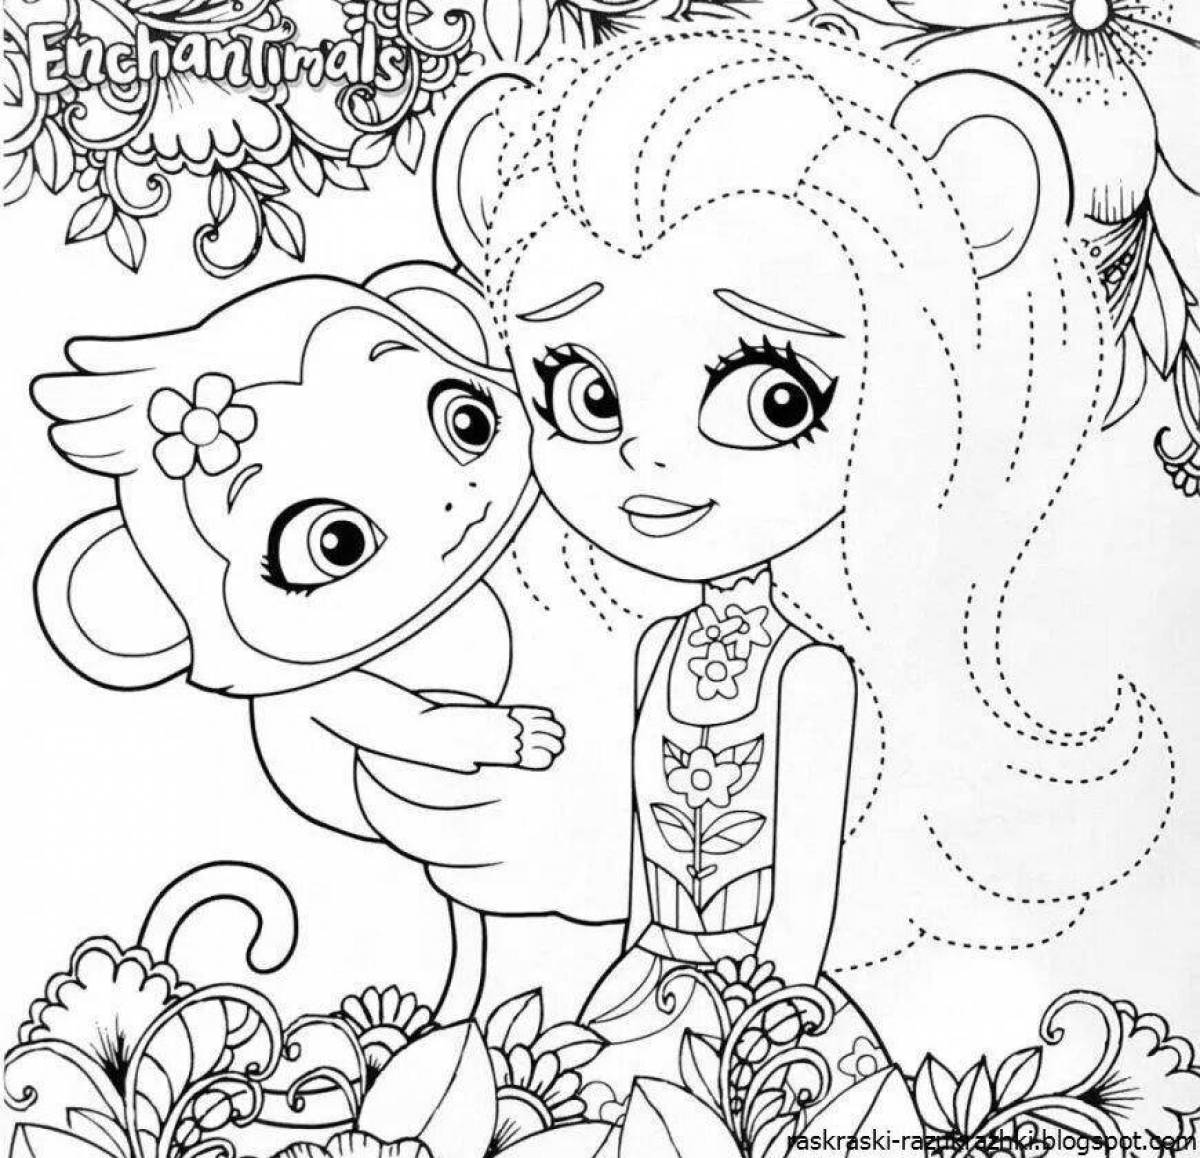 Coloring book colorful-dream for girls 5-6 years old from cartoons